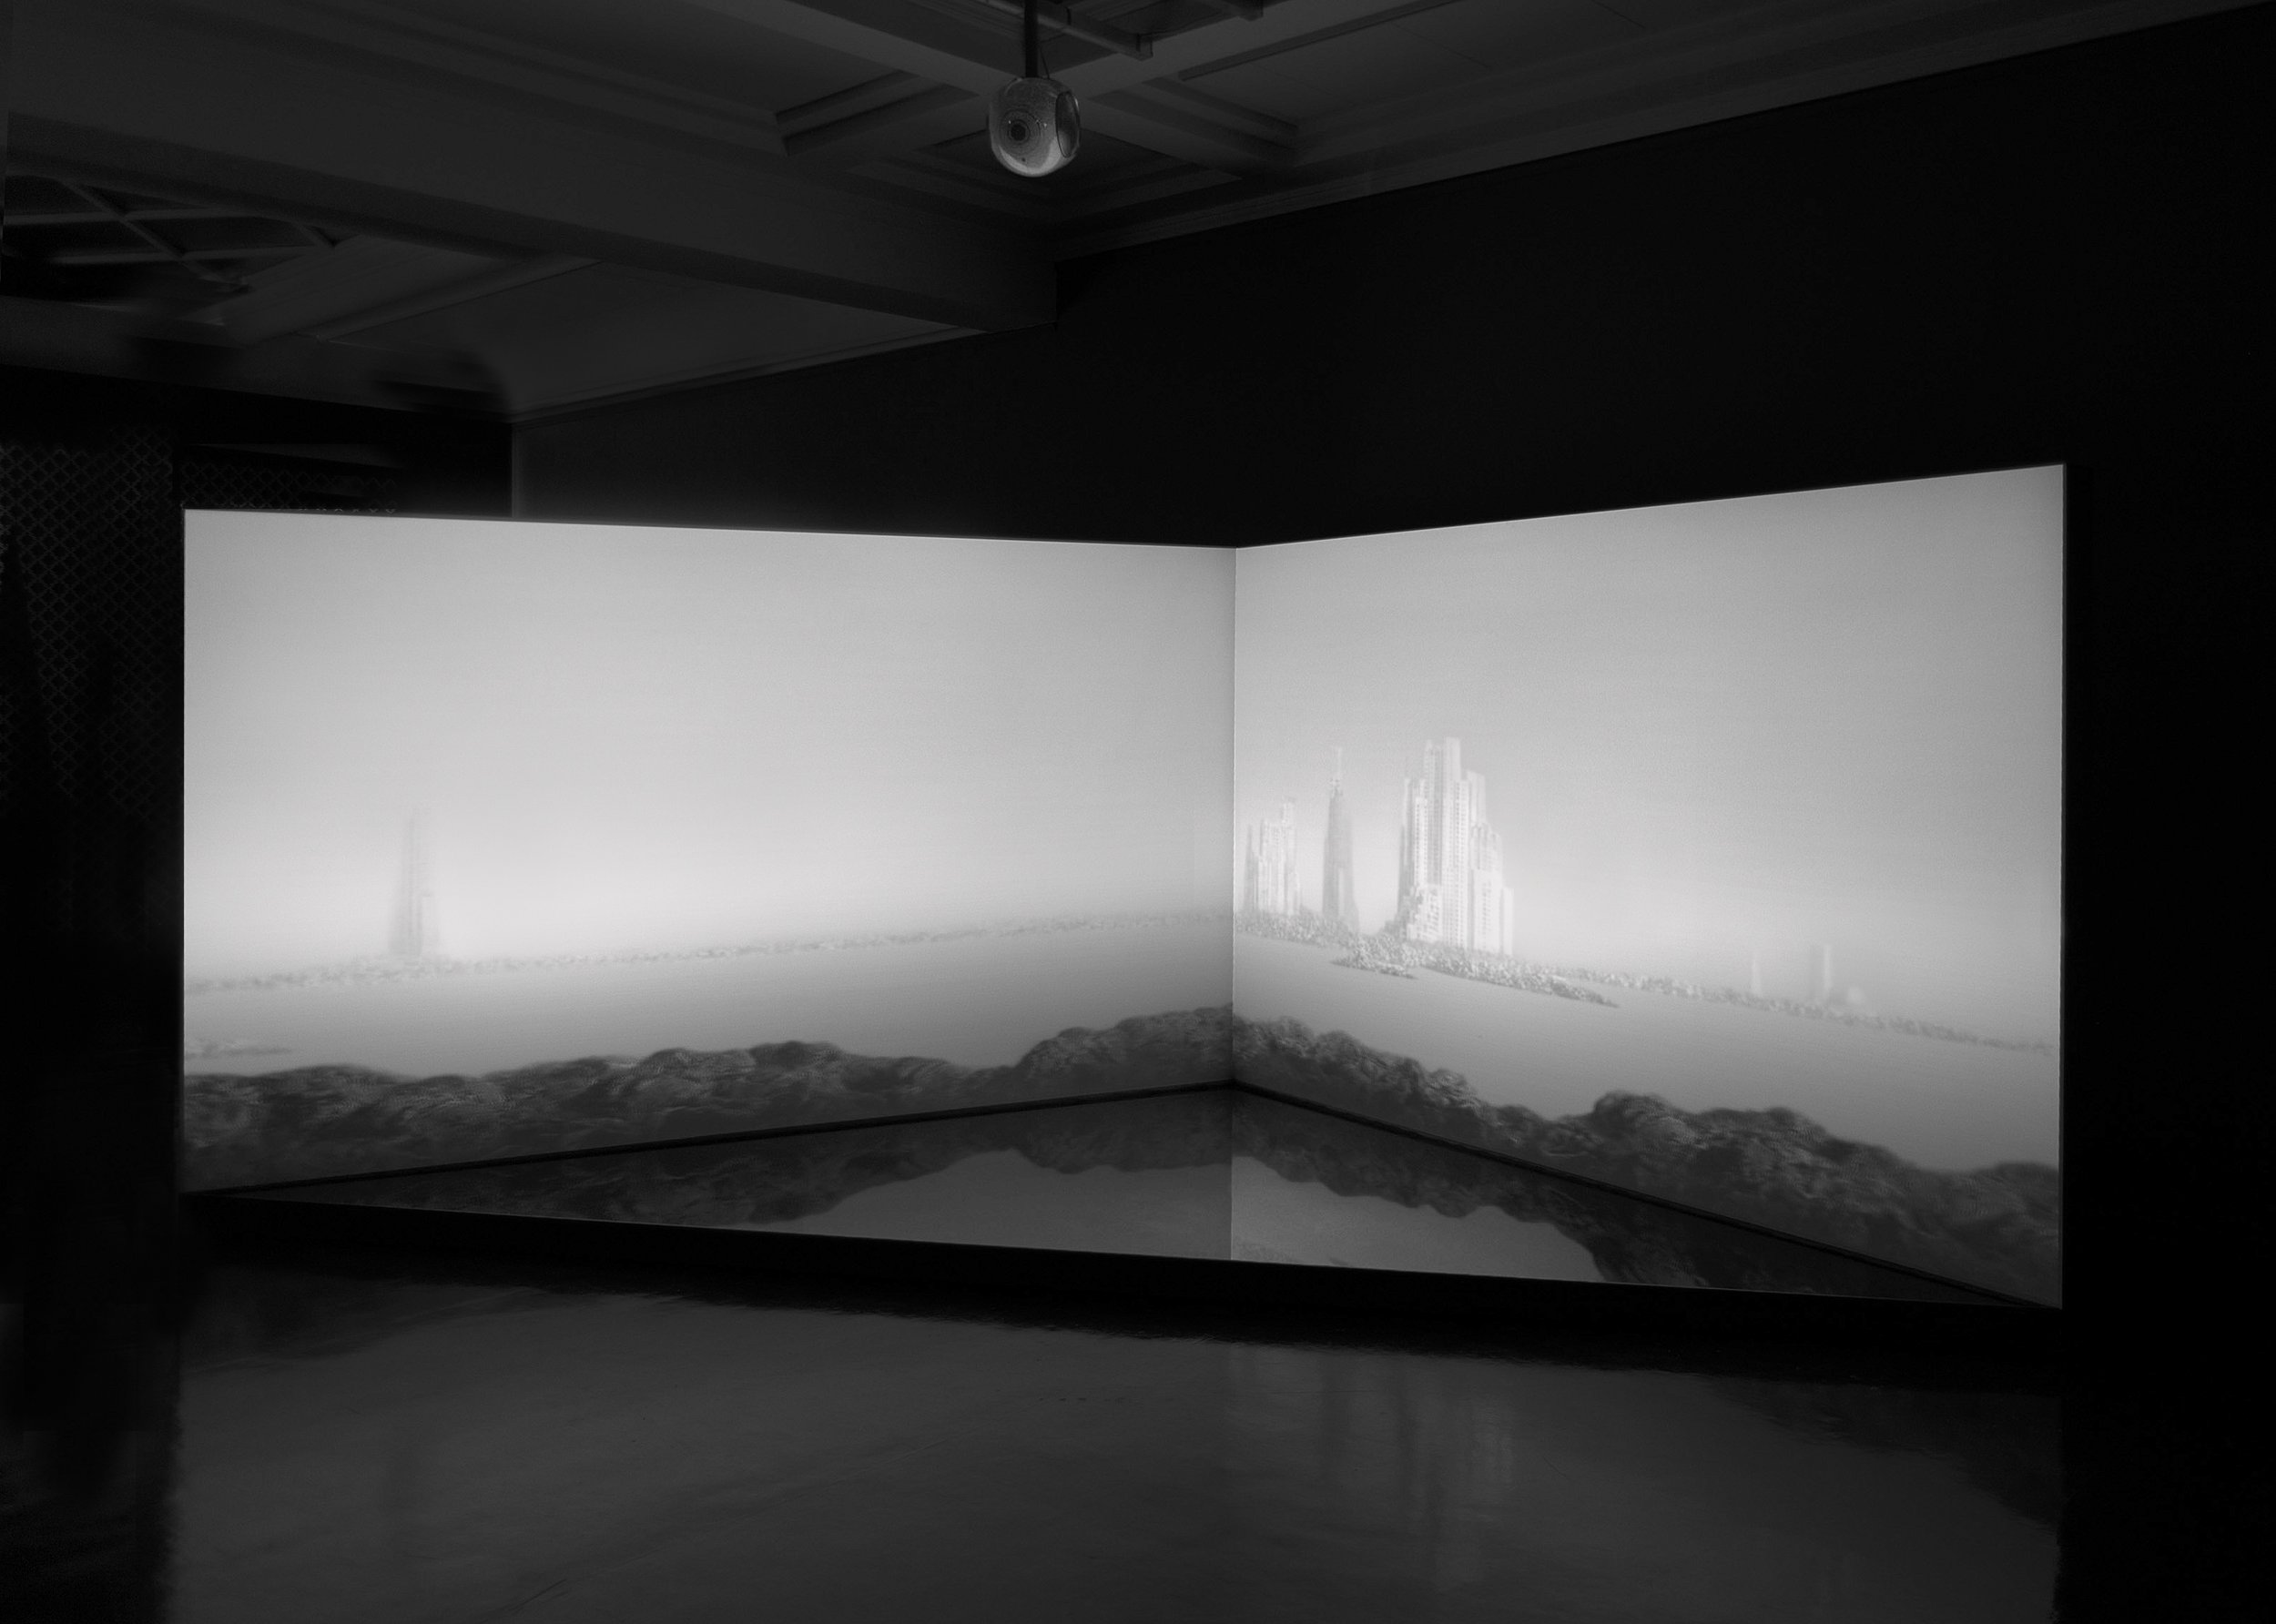  link:  Constructed sites   2014  video/sound/water installation  300x600 cm  Vigeland Museum  Oslo 2014/15 